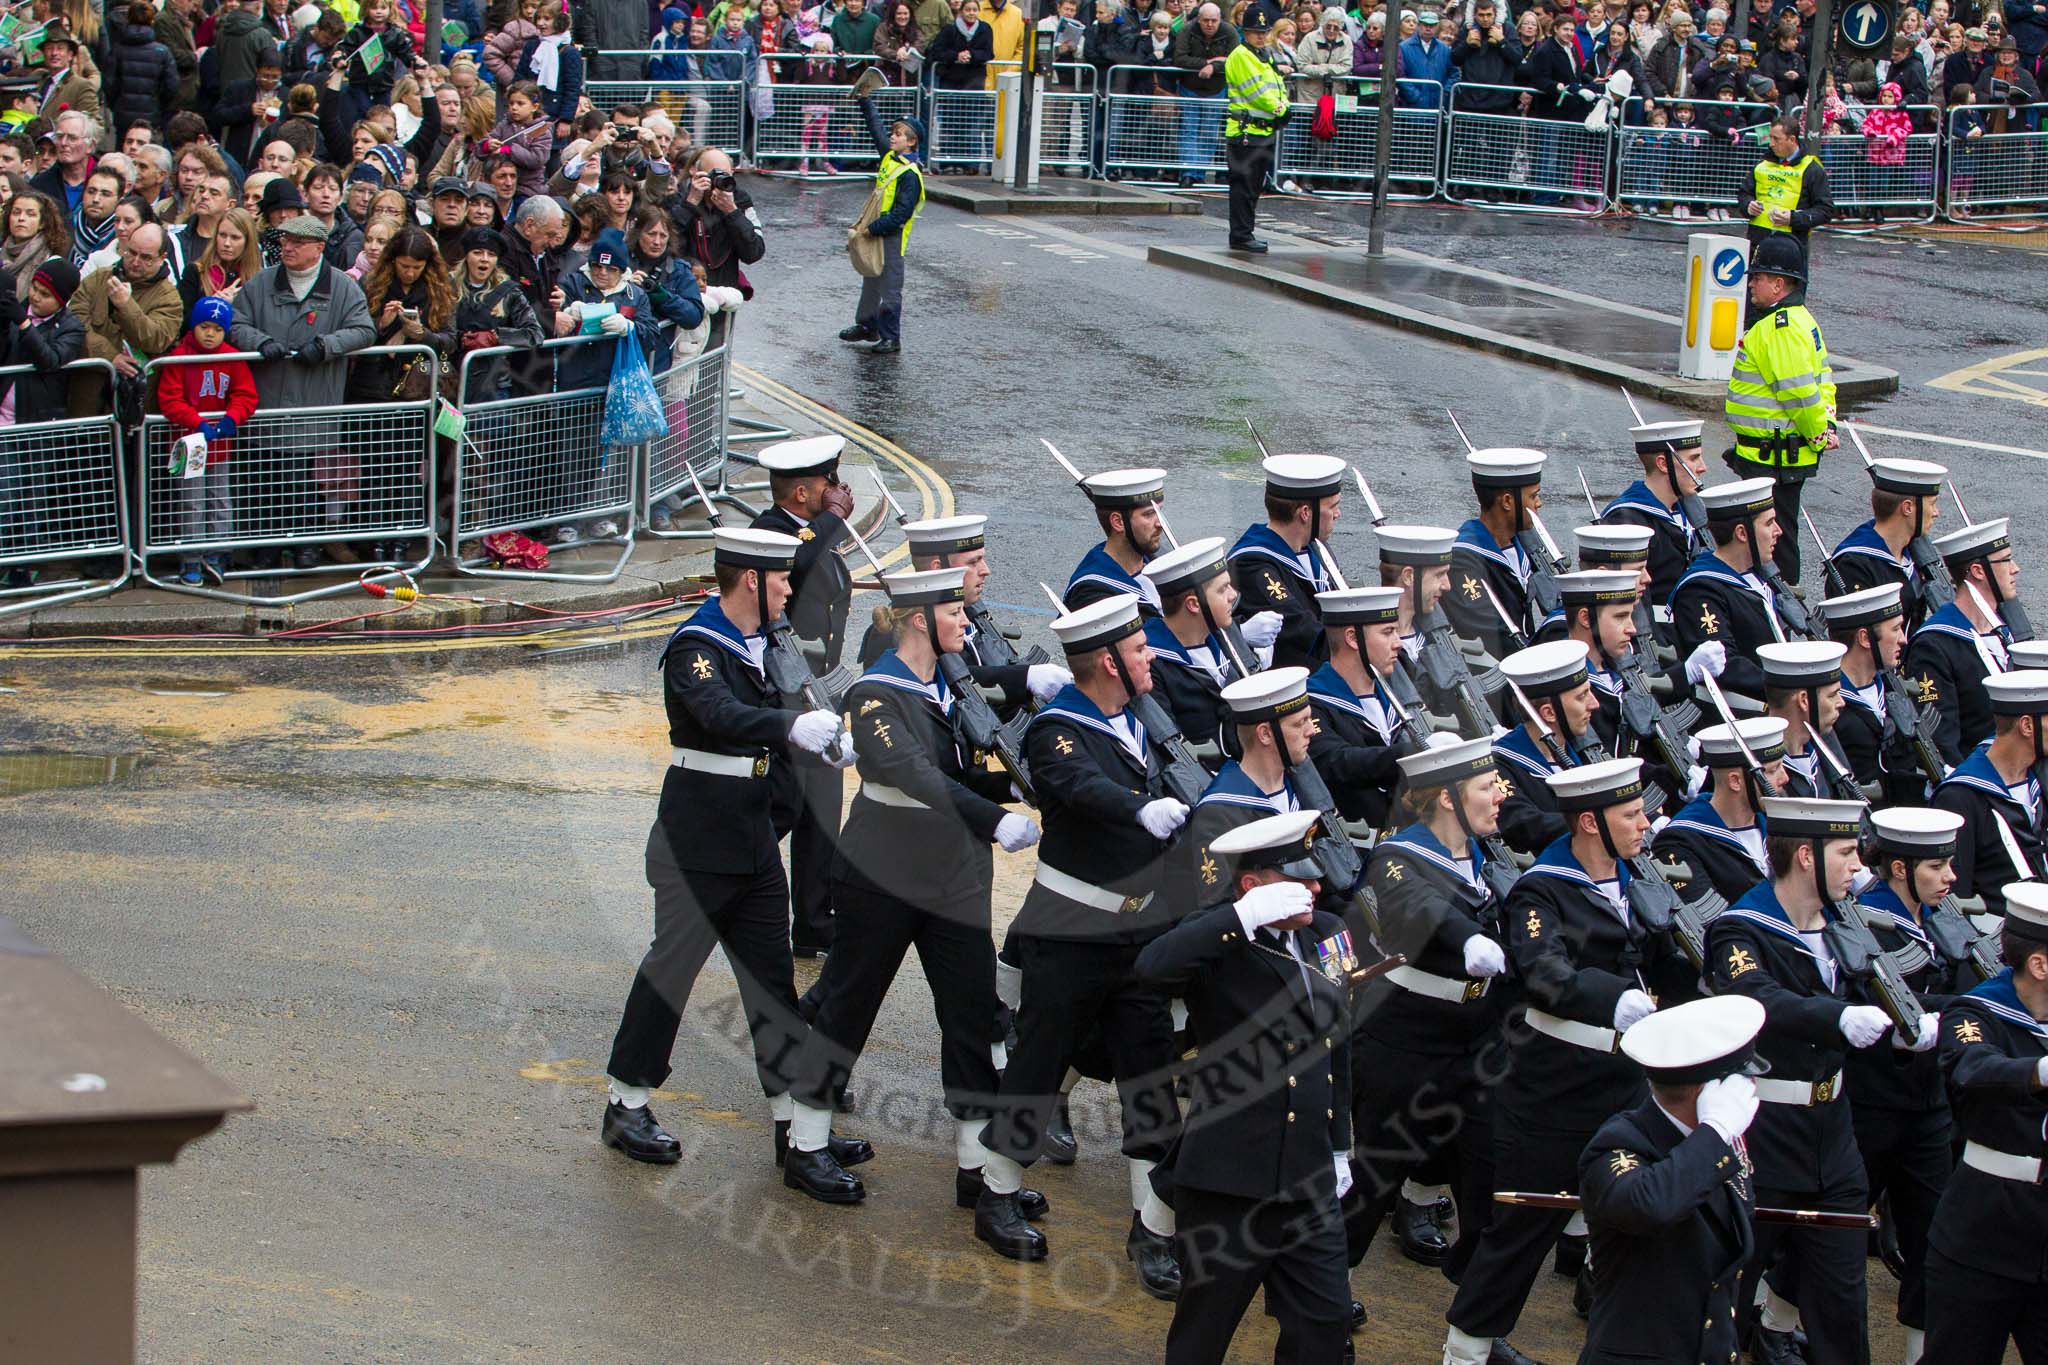 Lord Mayor's Show 2012: Entry 87 - Royal Navy (HMS Collingwood)..
Press stand opposite Mansion House, City of London,
London,
Greater London,
United Kingdom,
on 10 November 2012 at 11:38, image #1155